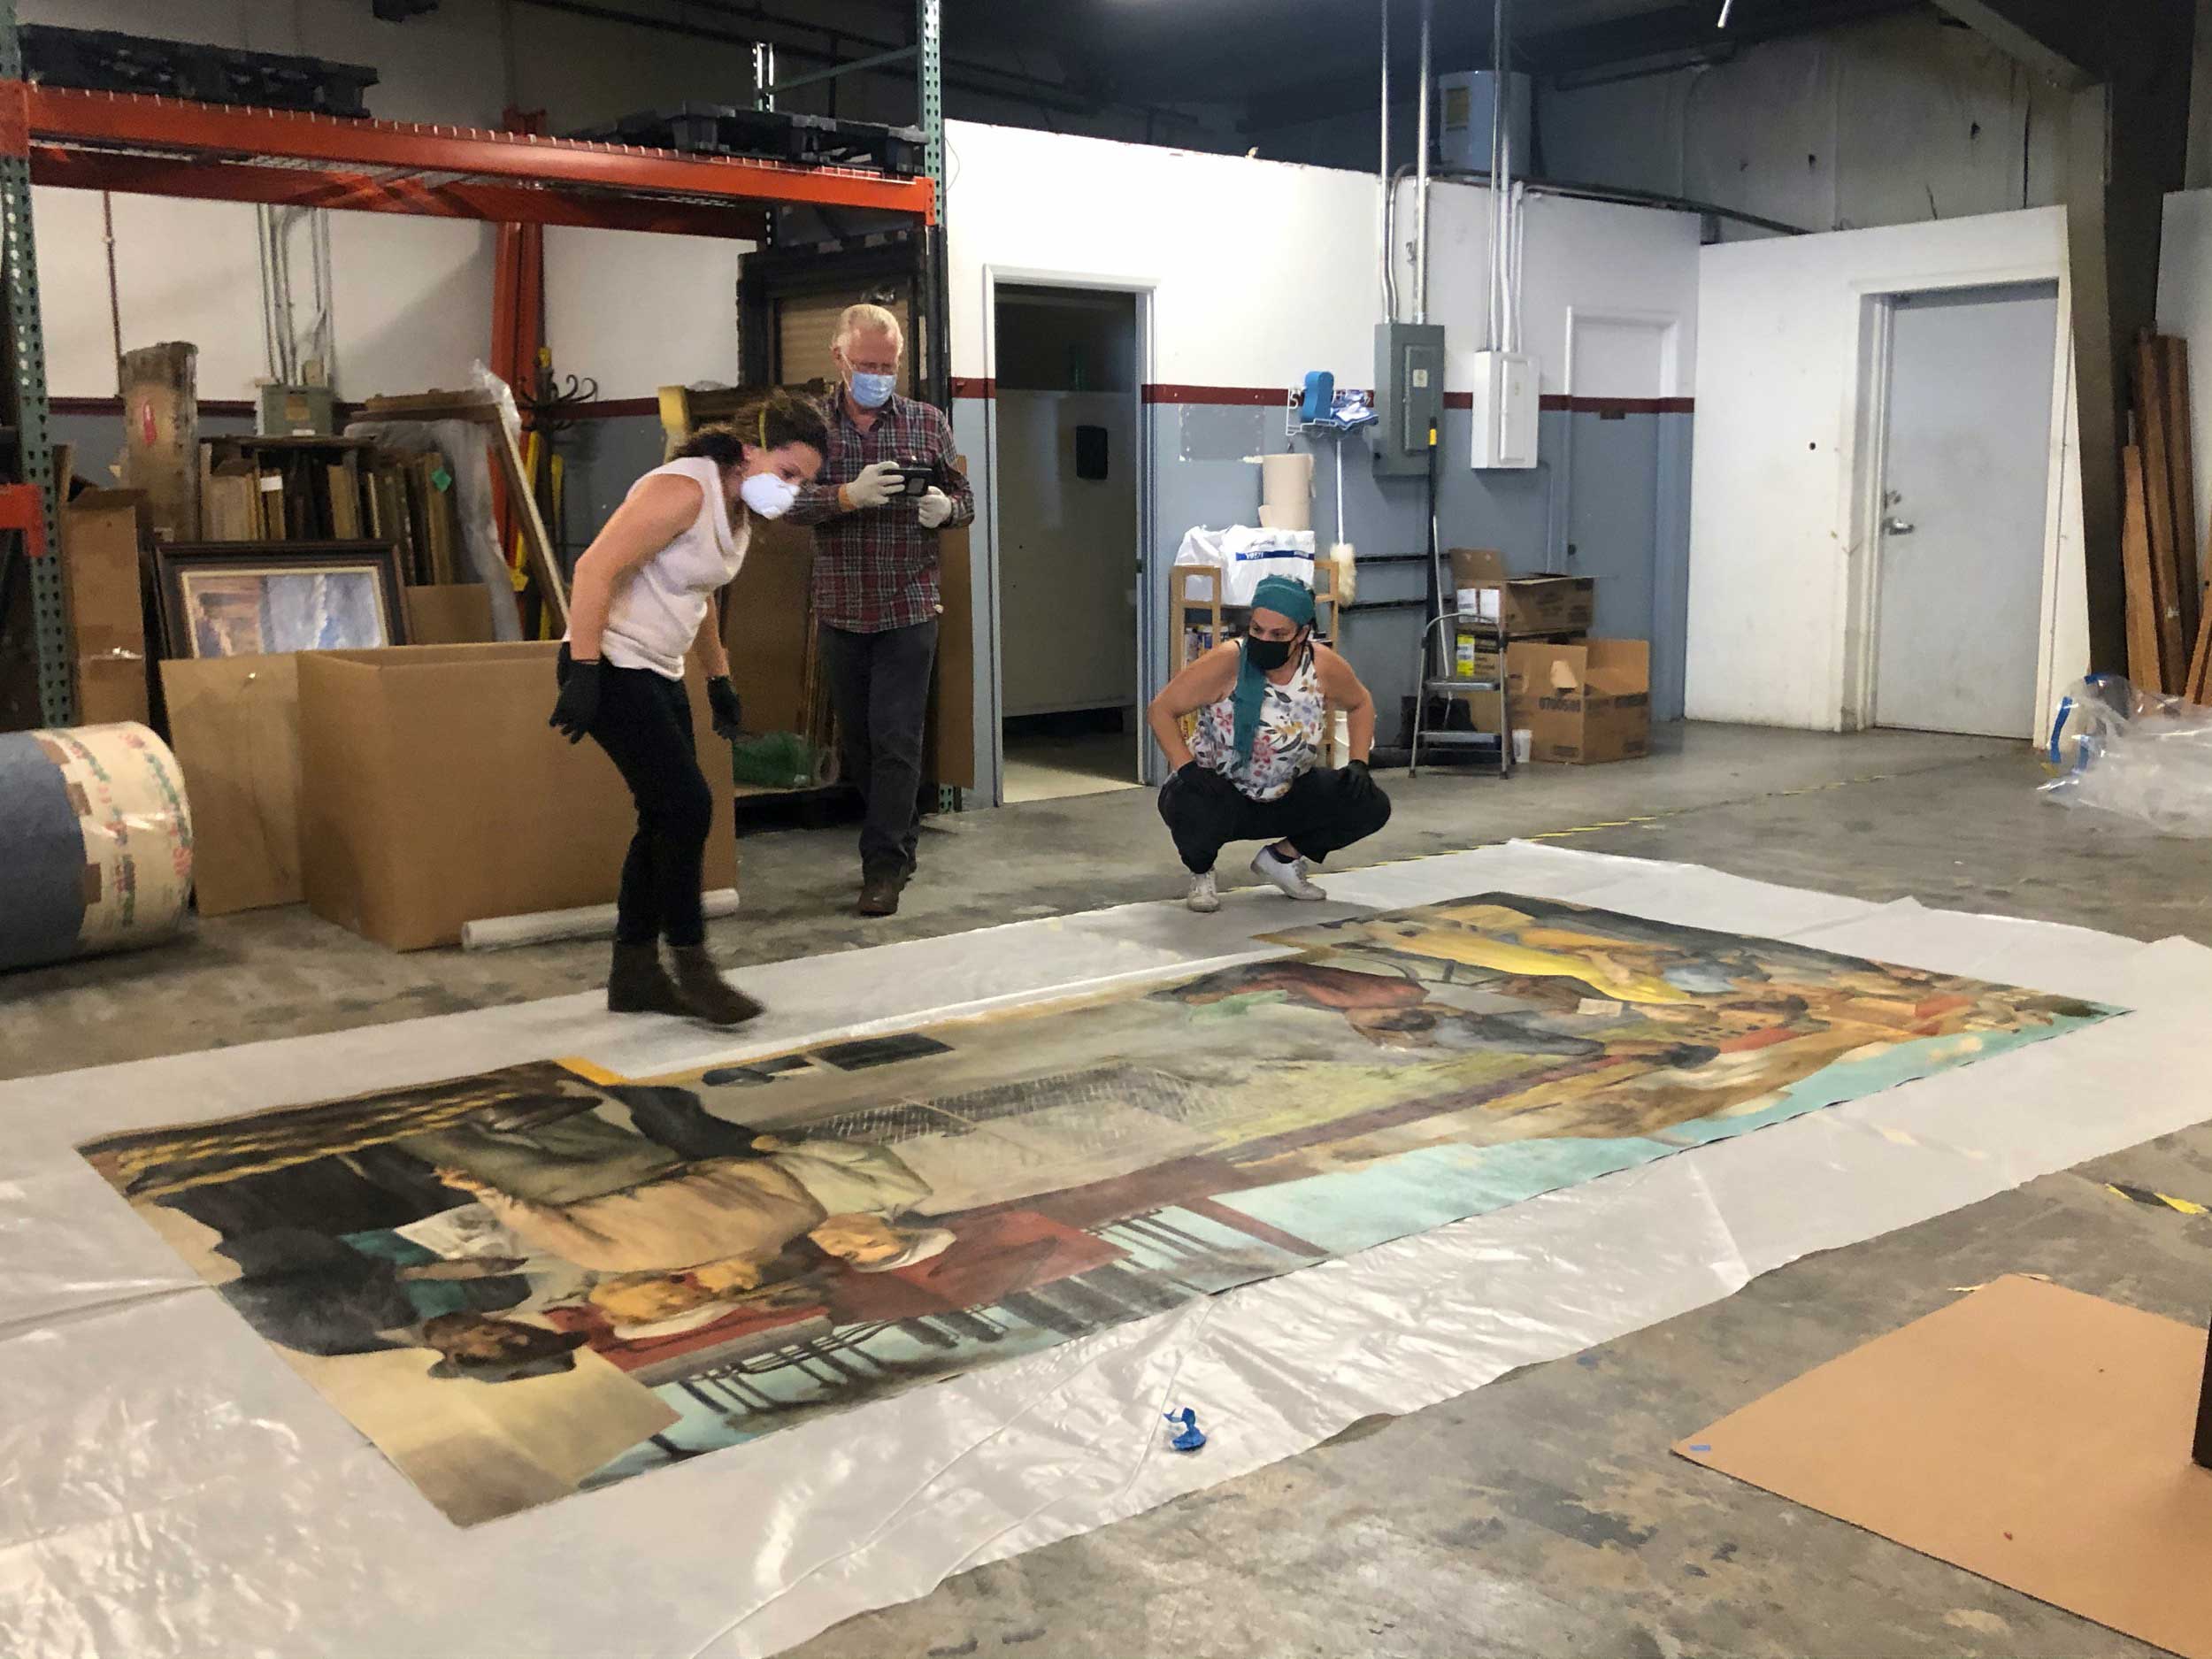 FACL Conservators Virginia and Oriana Inspecting Mural (May 2020)